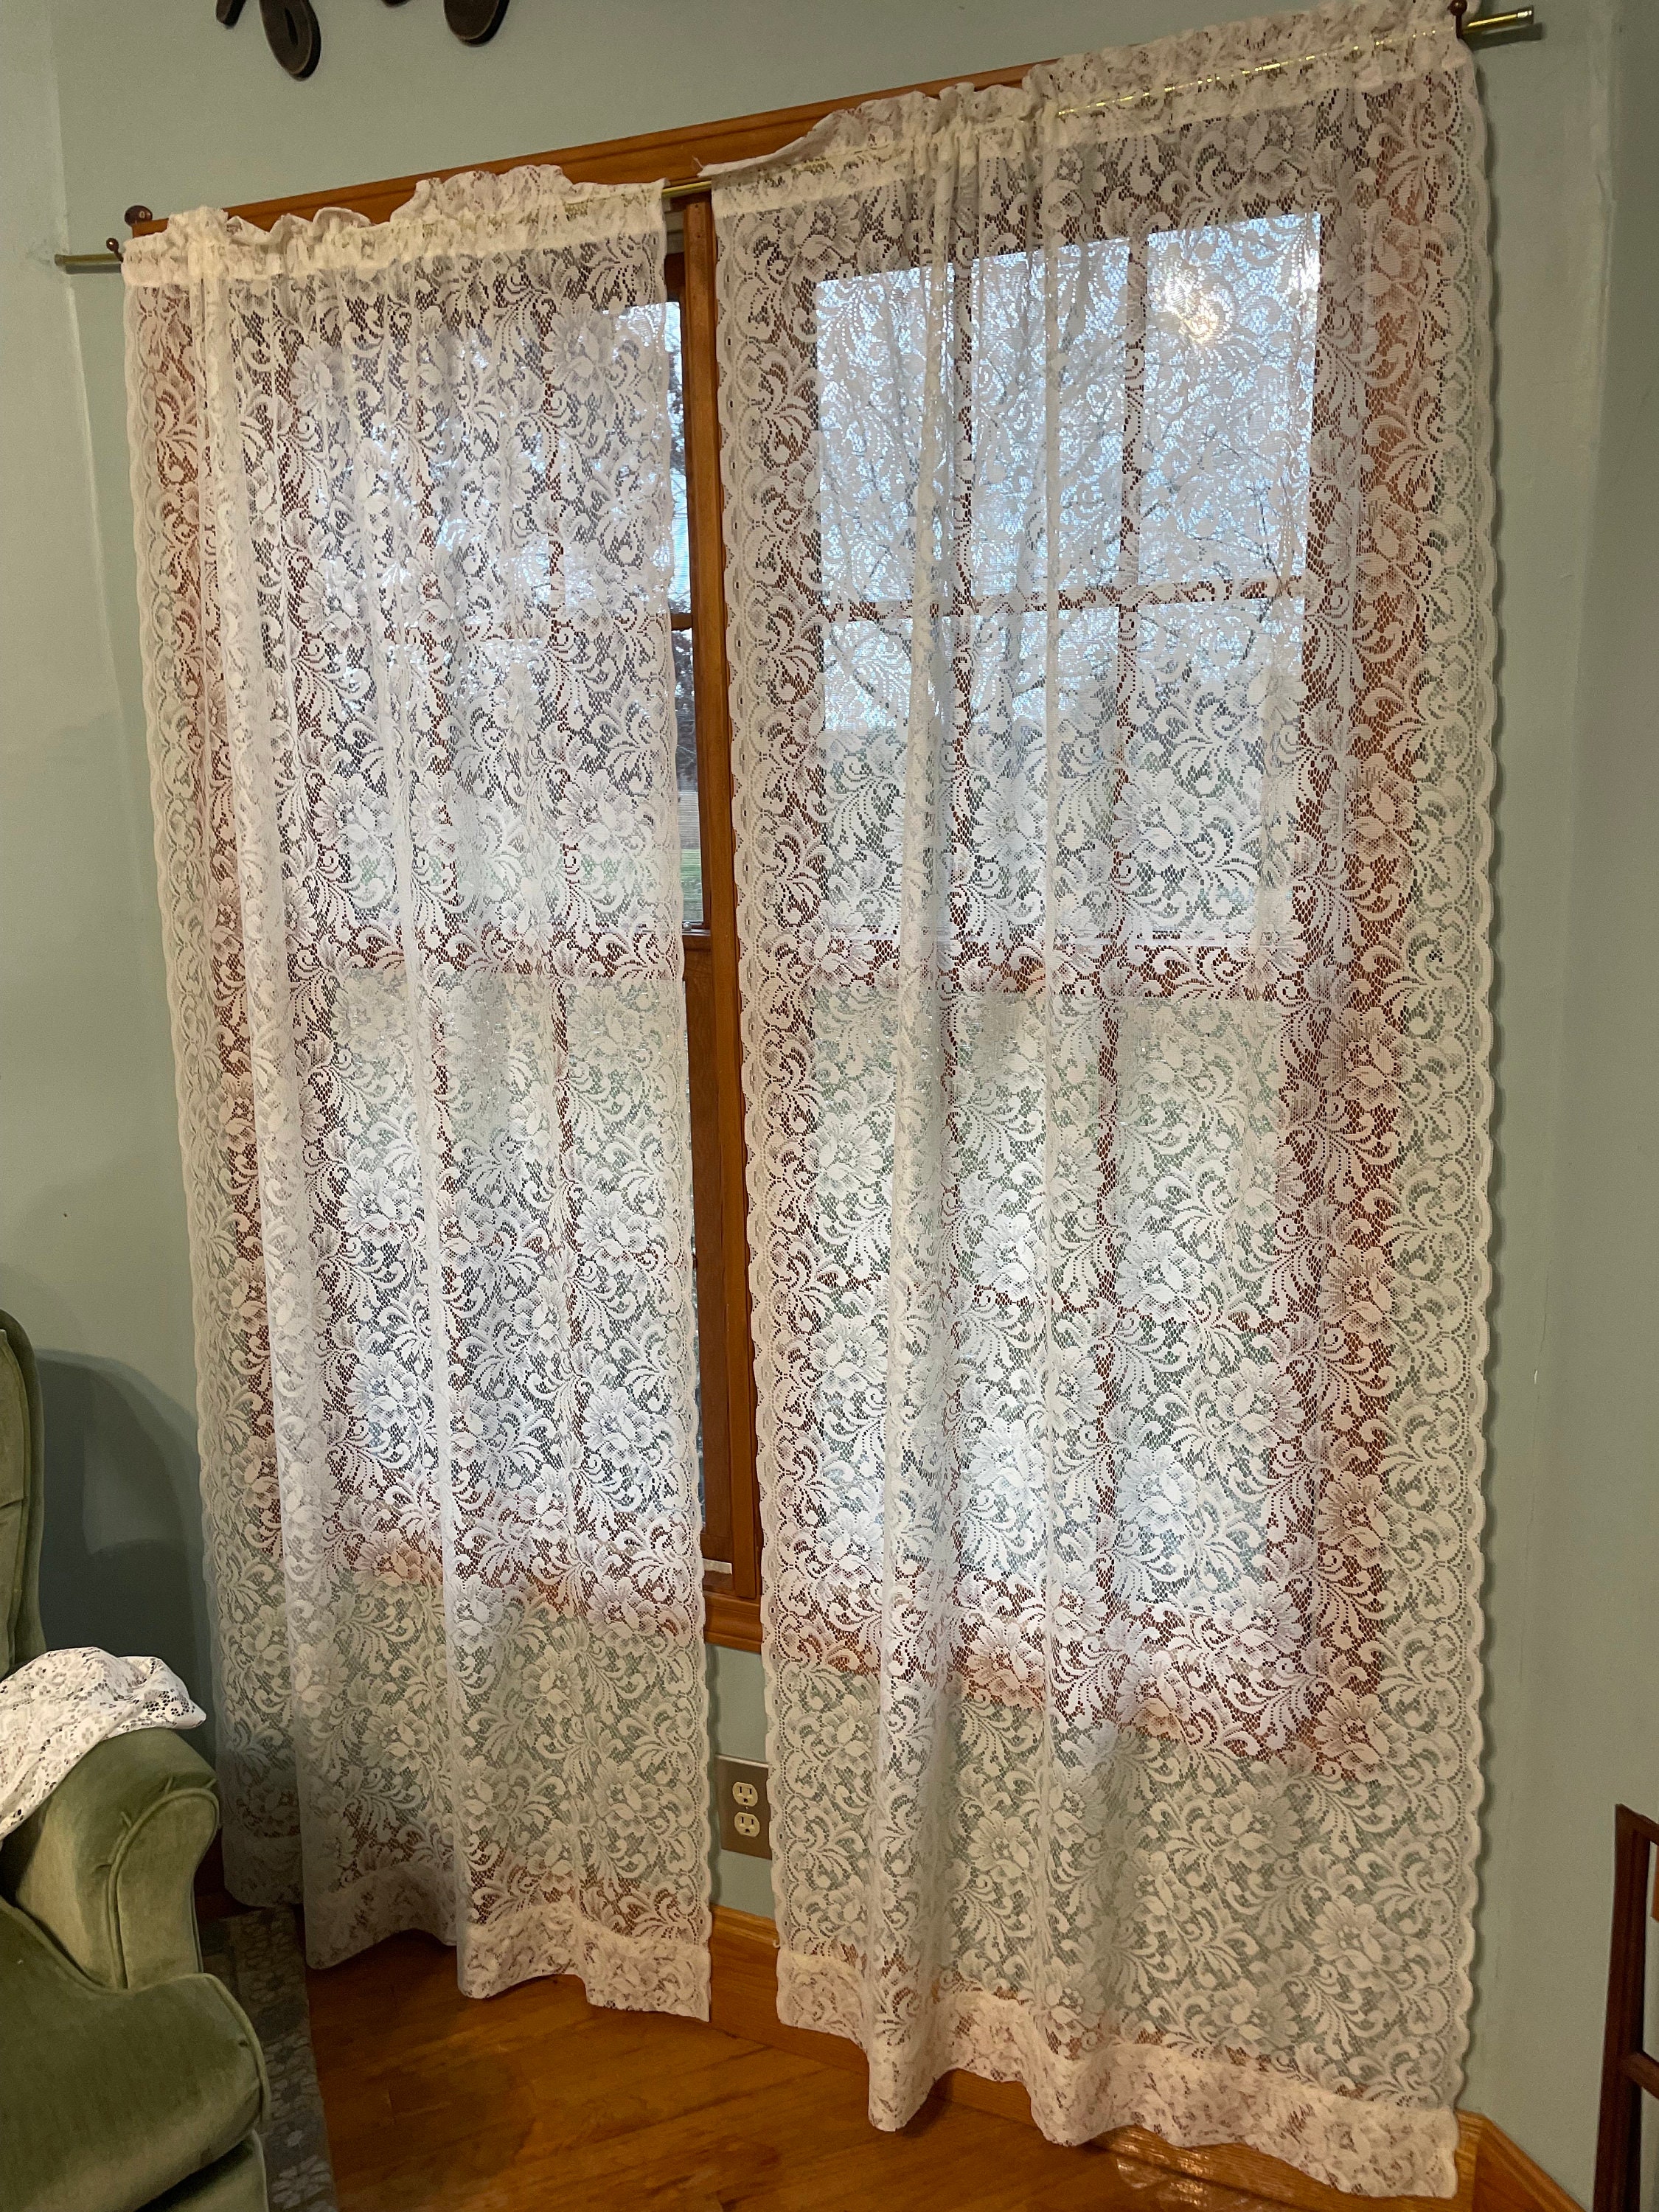 Pink Floral Window Curtains Nursery Drapes, Roses Flowers Girl